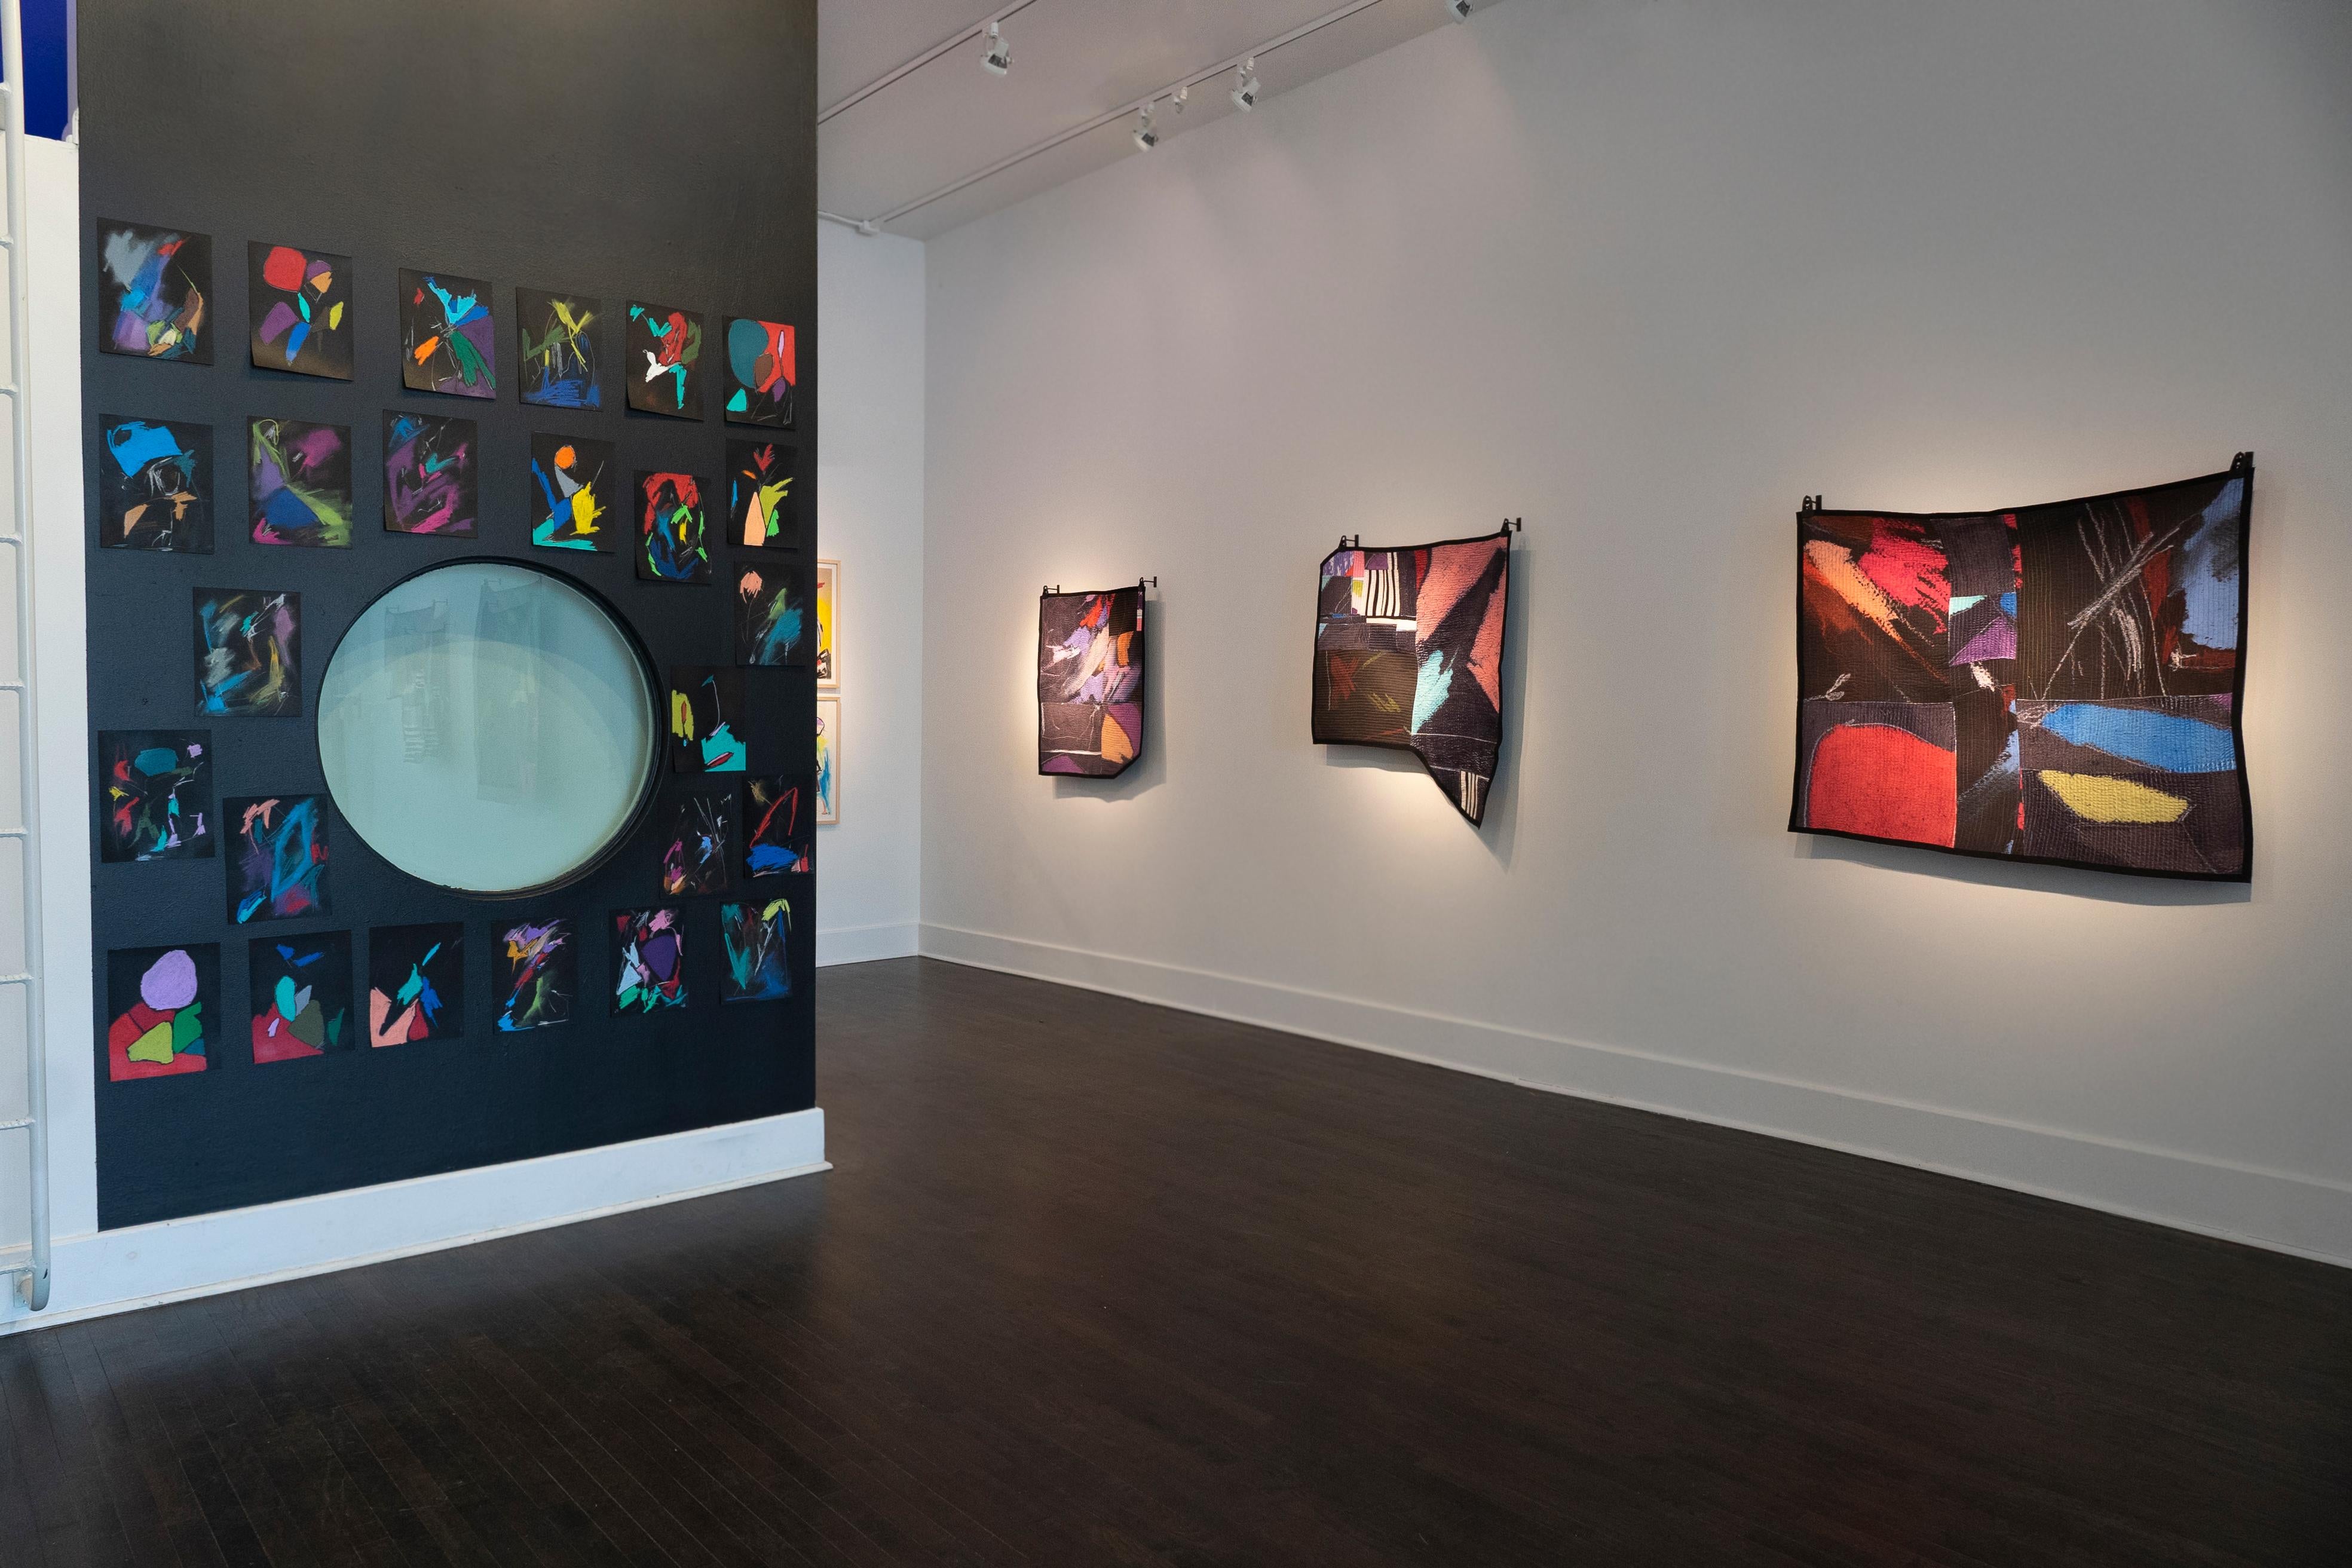 Plush Velvet, Satin, and Calico Cotton, 49.5 x 42 inches, 2022 (Hanging hardware included)

Julian J. Jones quilts made from images taken from the artist’s gestural, abstract drawings (also on view) inspired by traditional African American quilting.